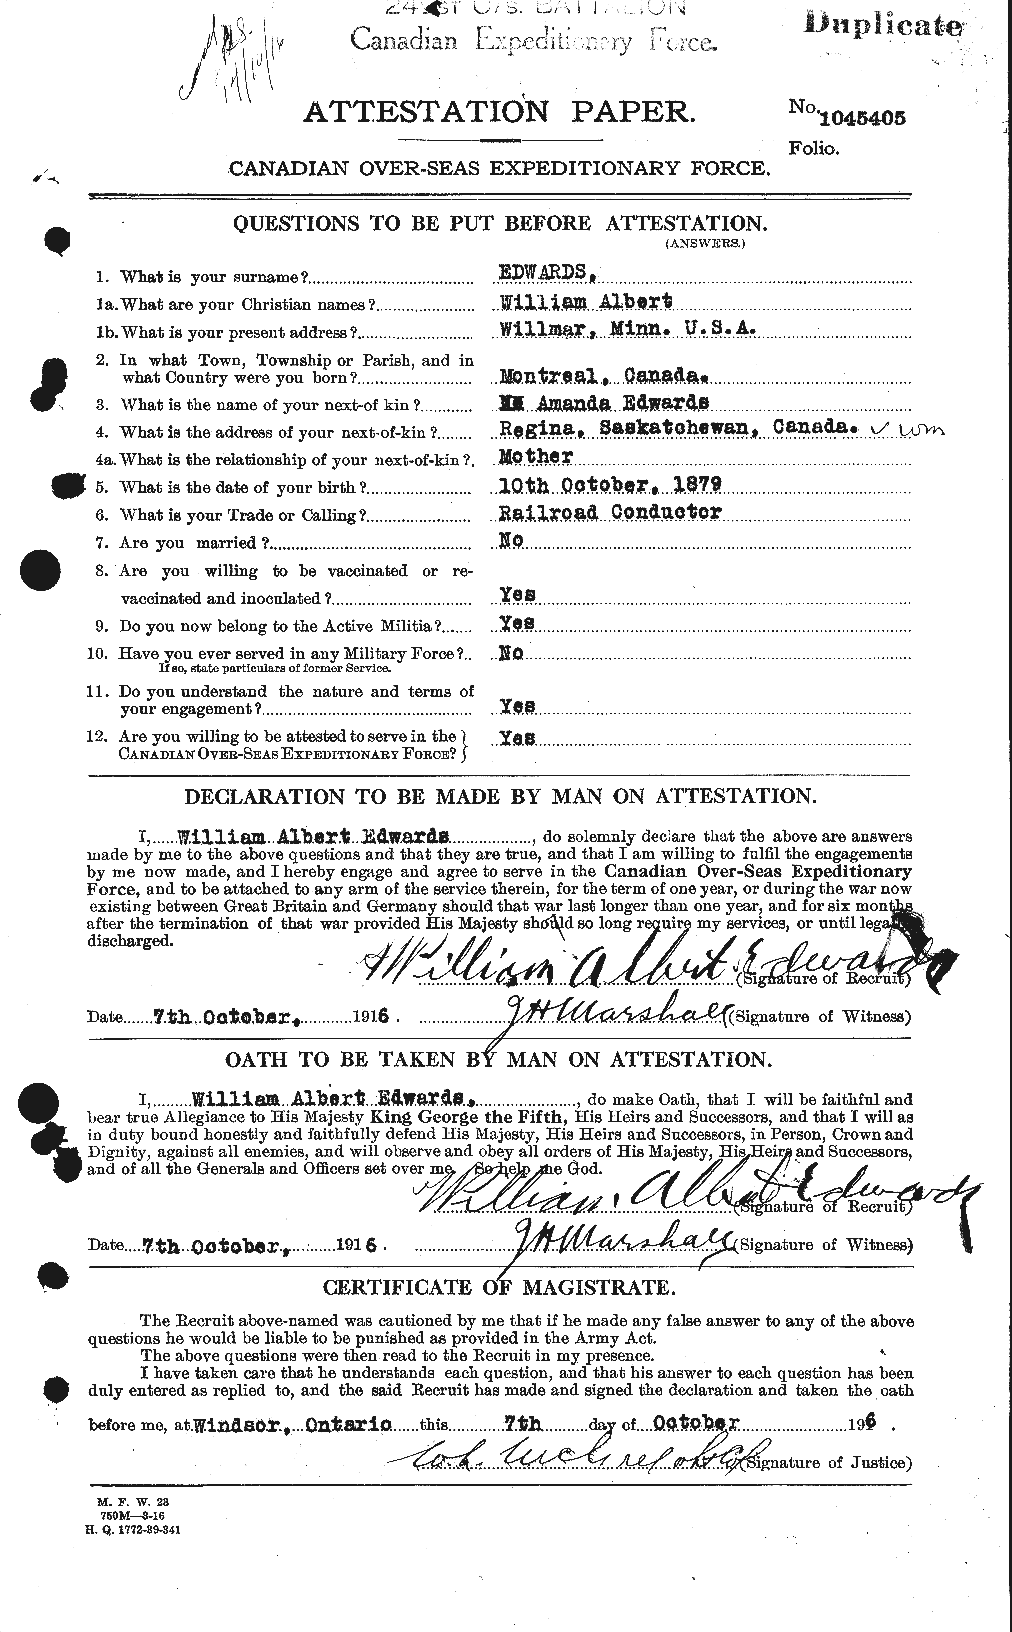 Personnel Records of the First World War - CEF 310407a